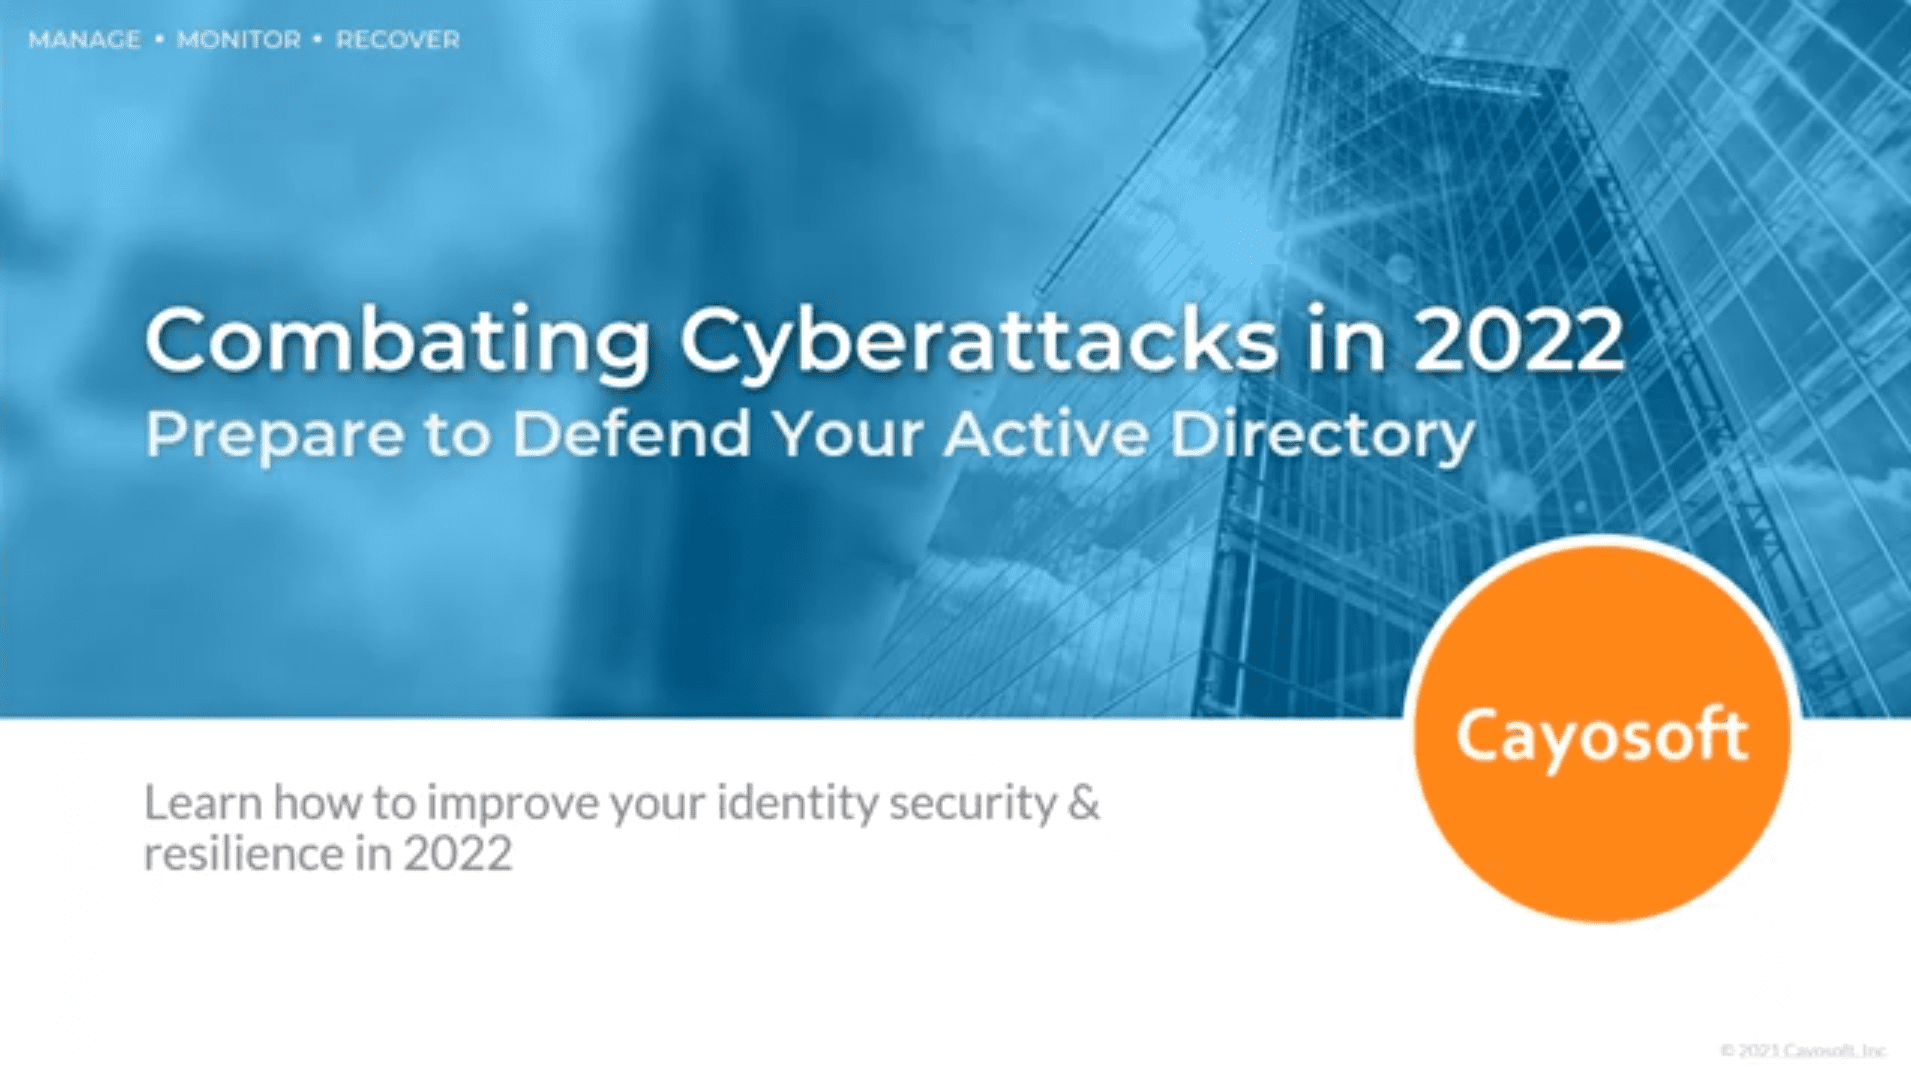 Combating Cyberattacks in 2022: Prepare to Defend Your Active Directory